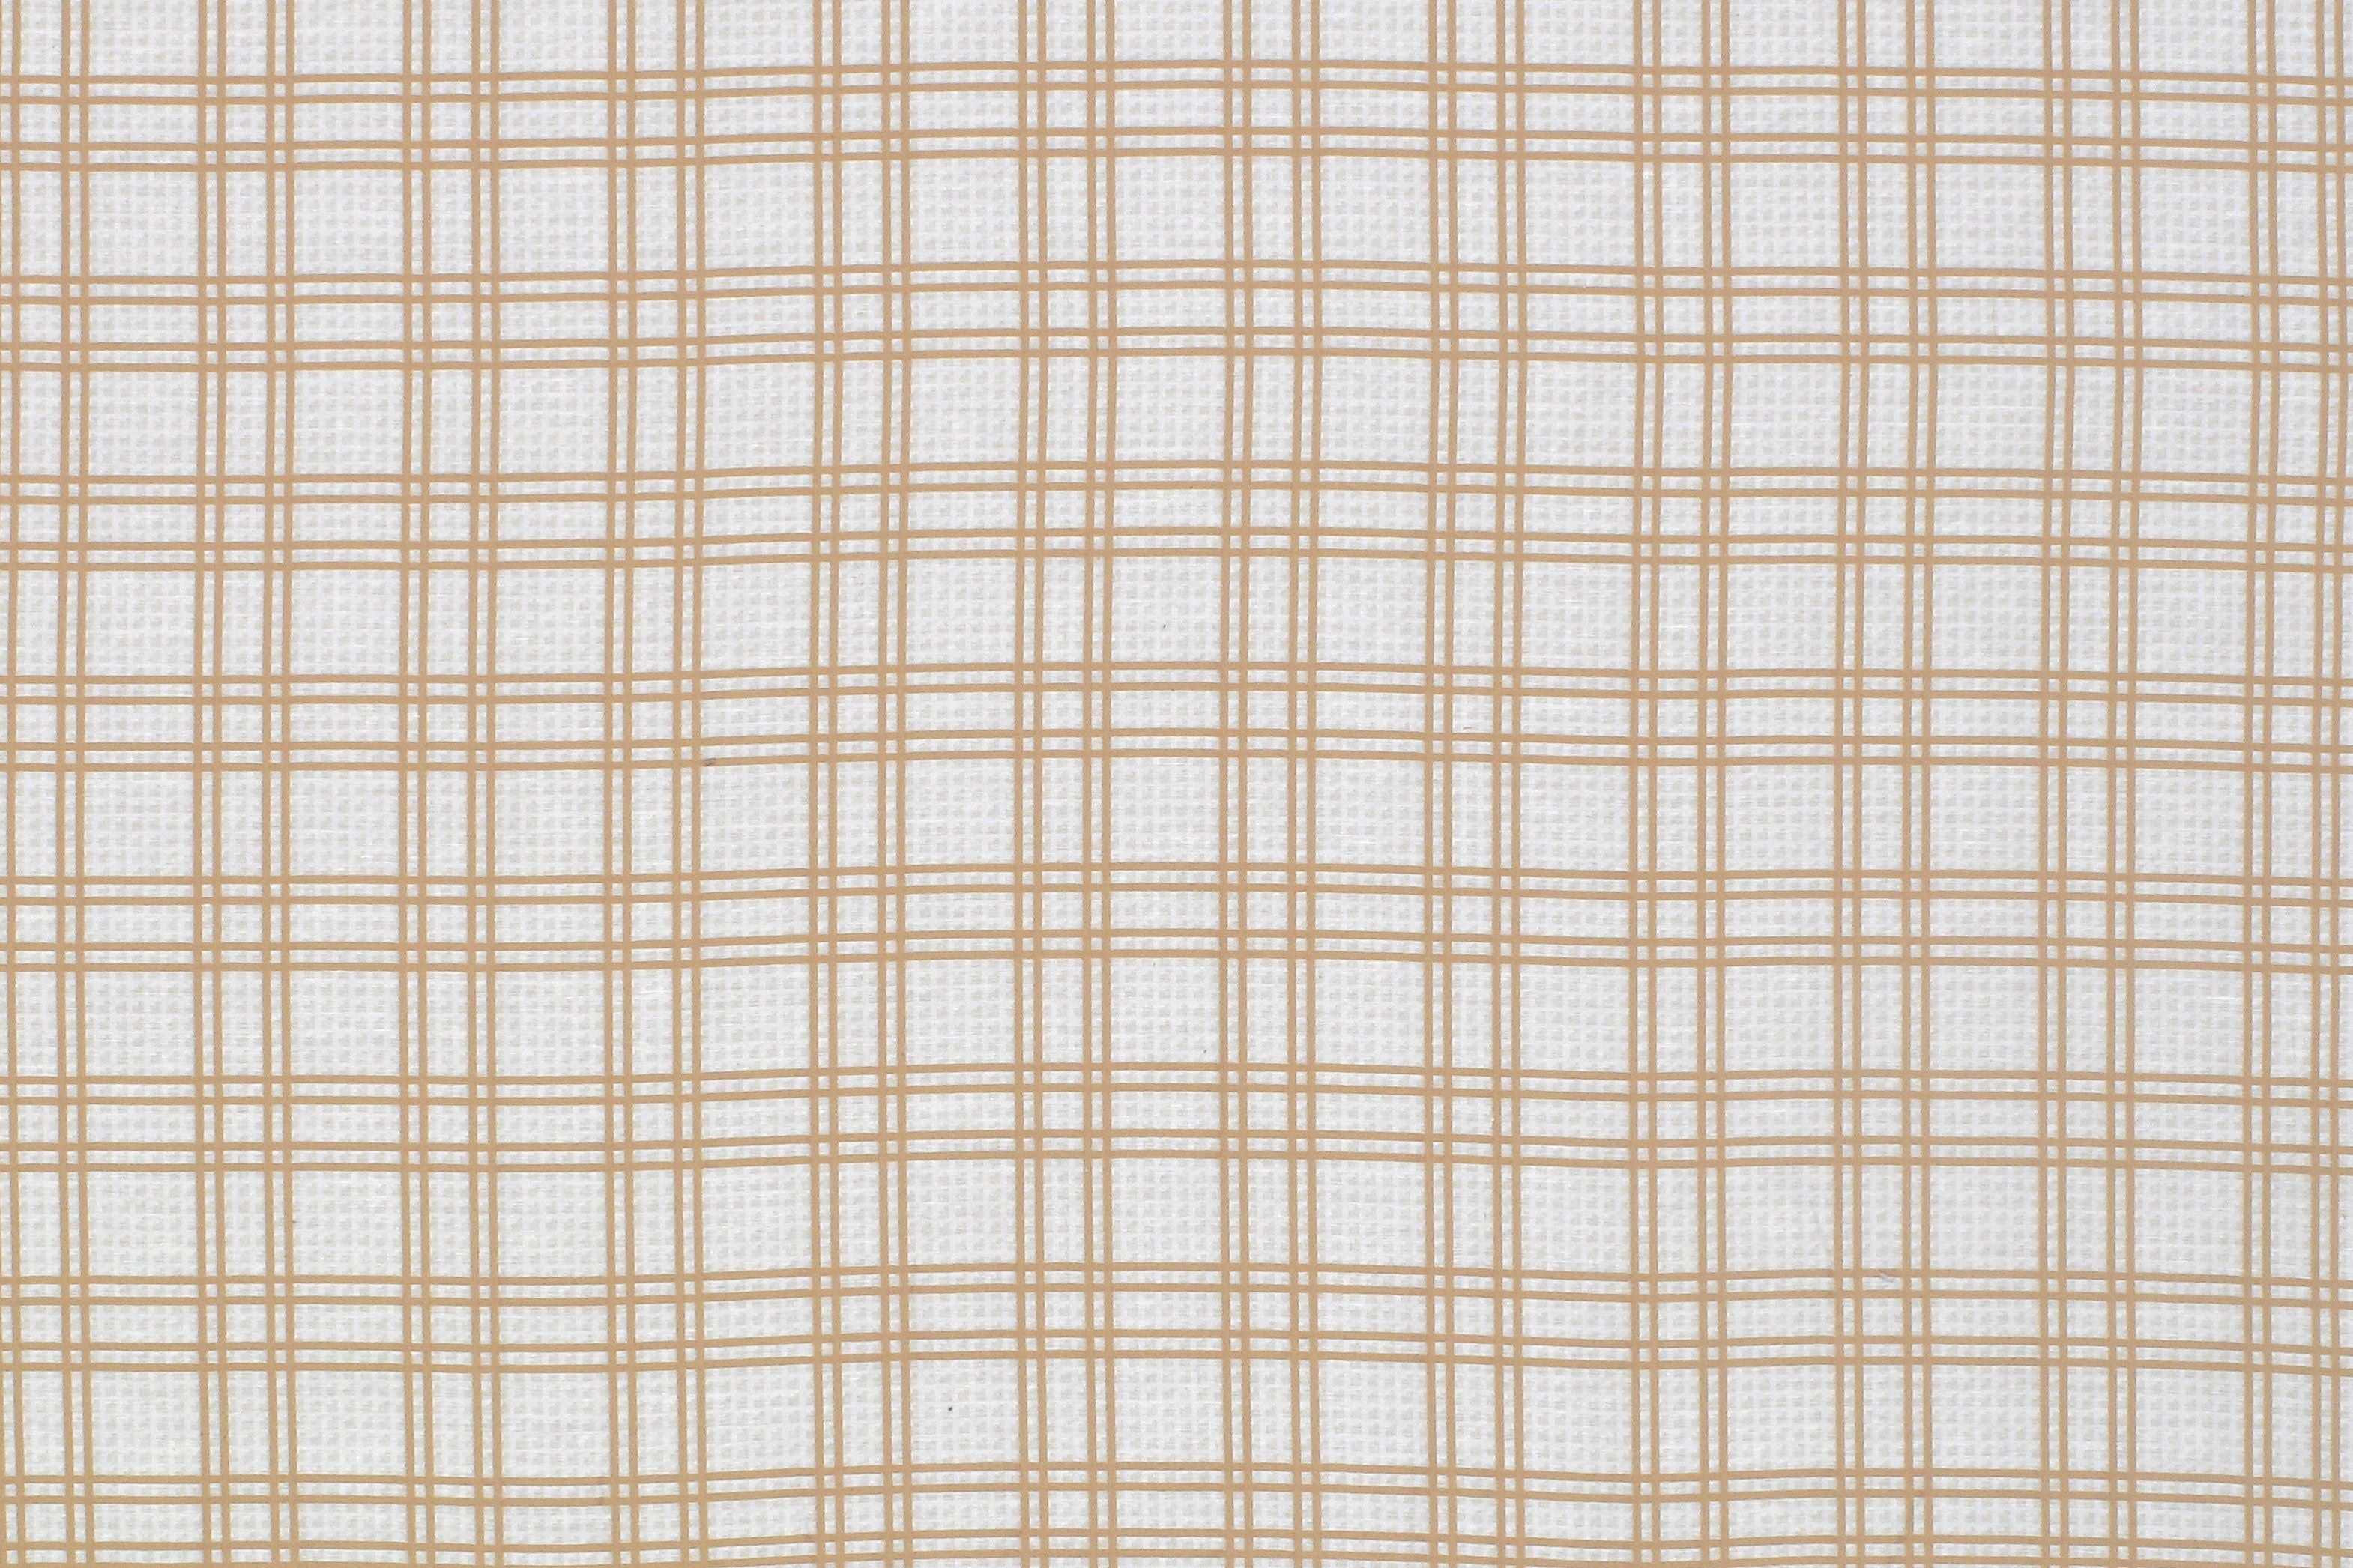 Wellesley fabric in desert color - pattern number M8 00012489 - by Scalamandre in the Old World Weavers collection